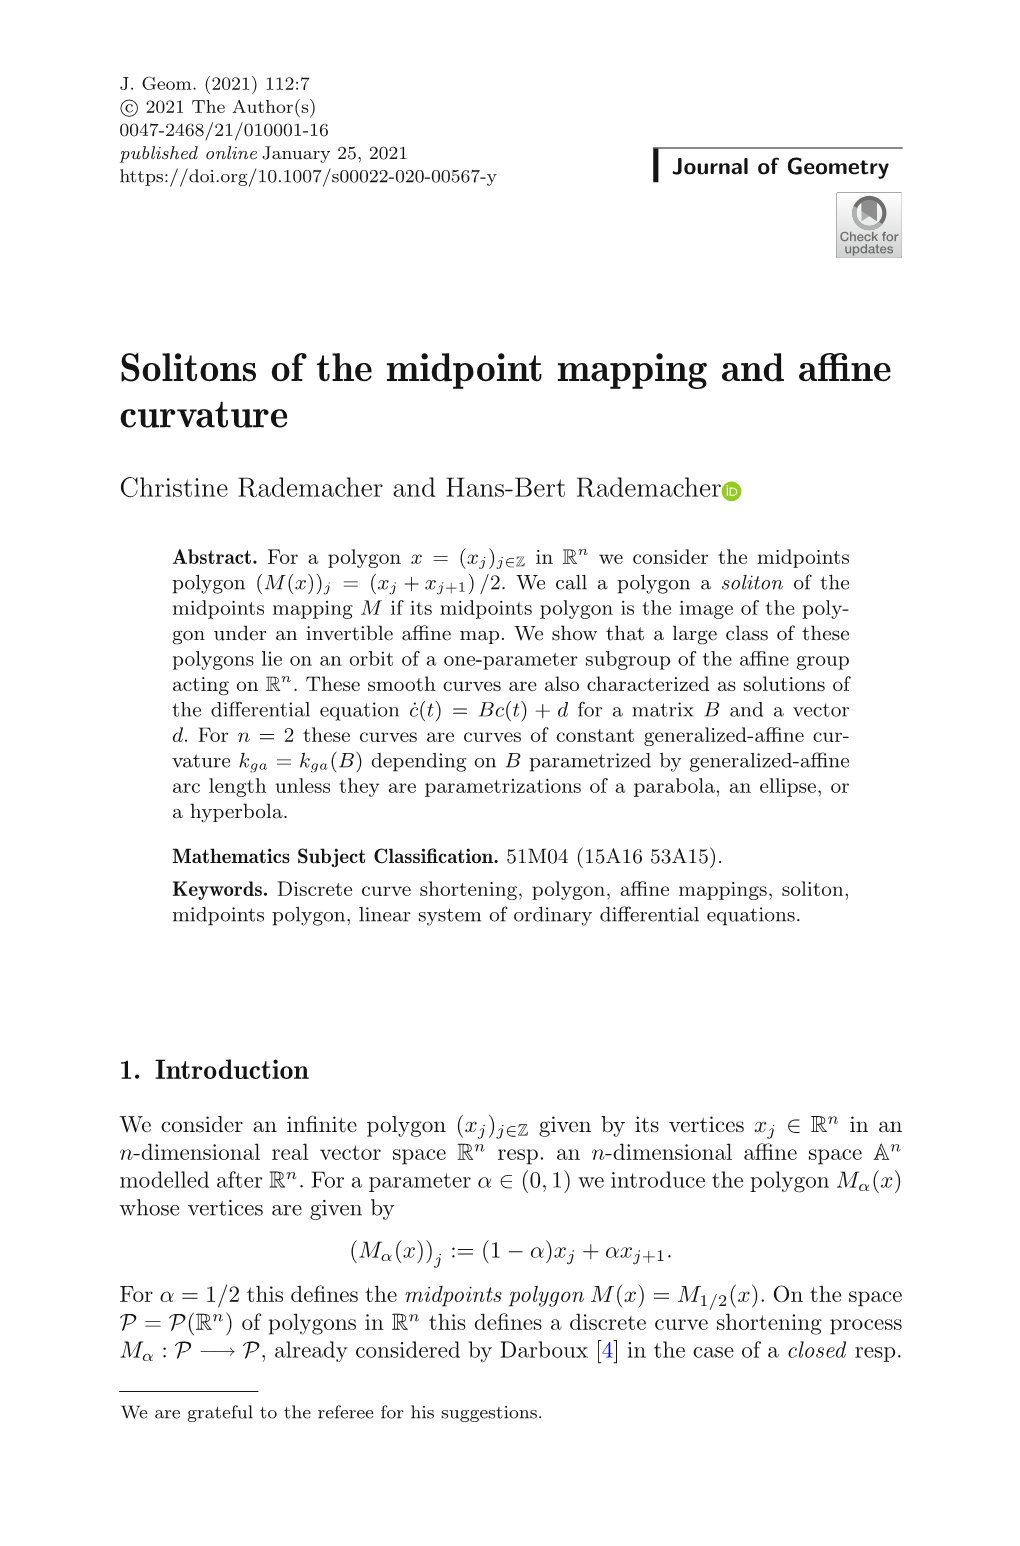 Solitons of the Midpoint Mapping and Affine Curvature